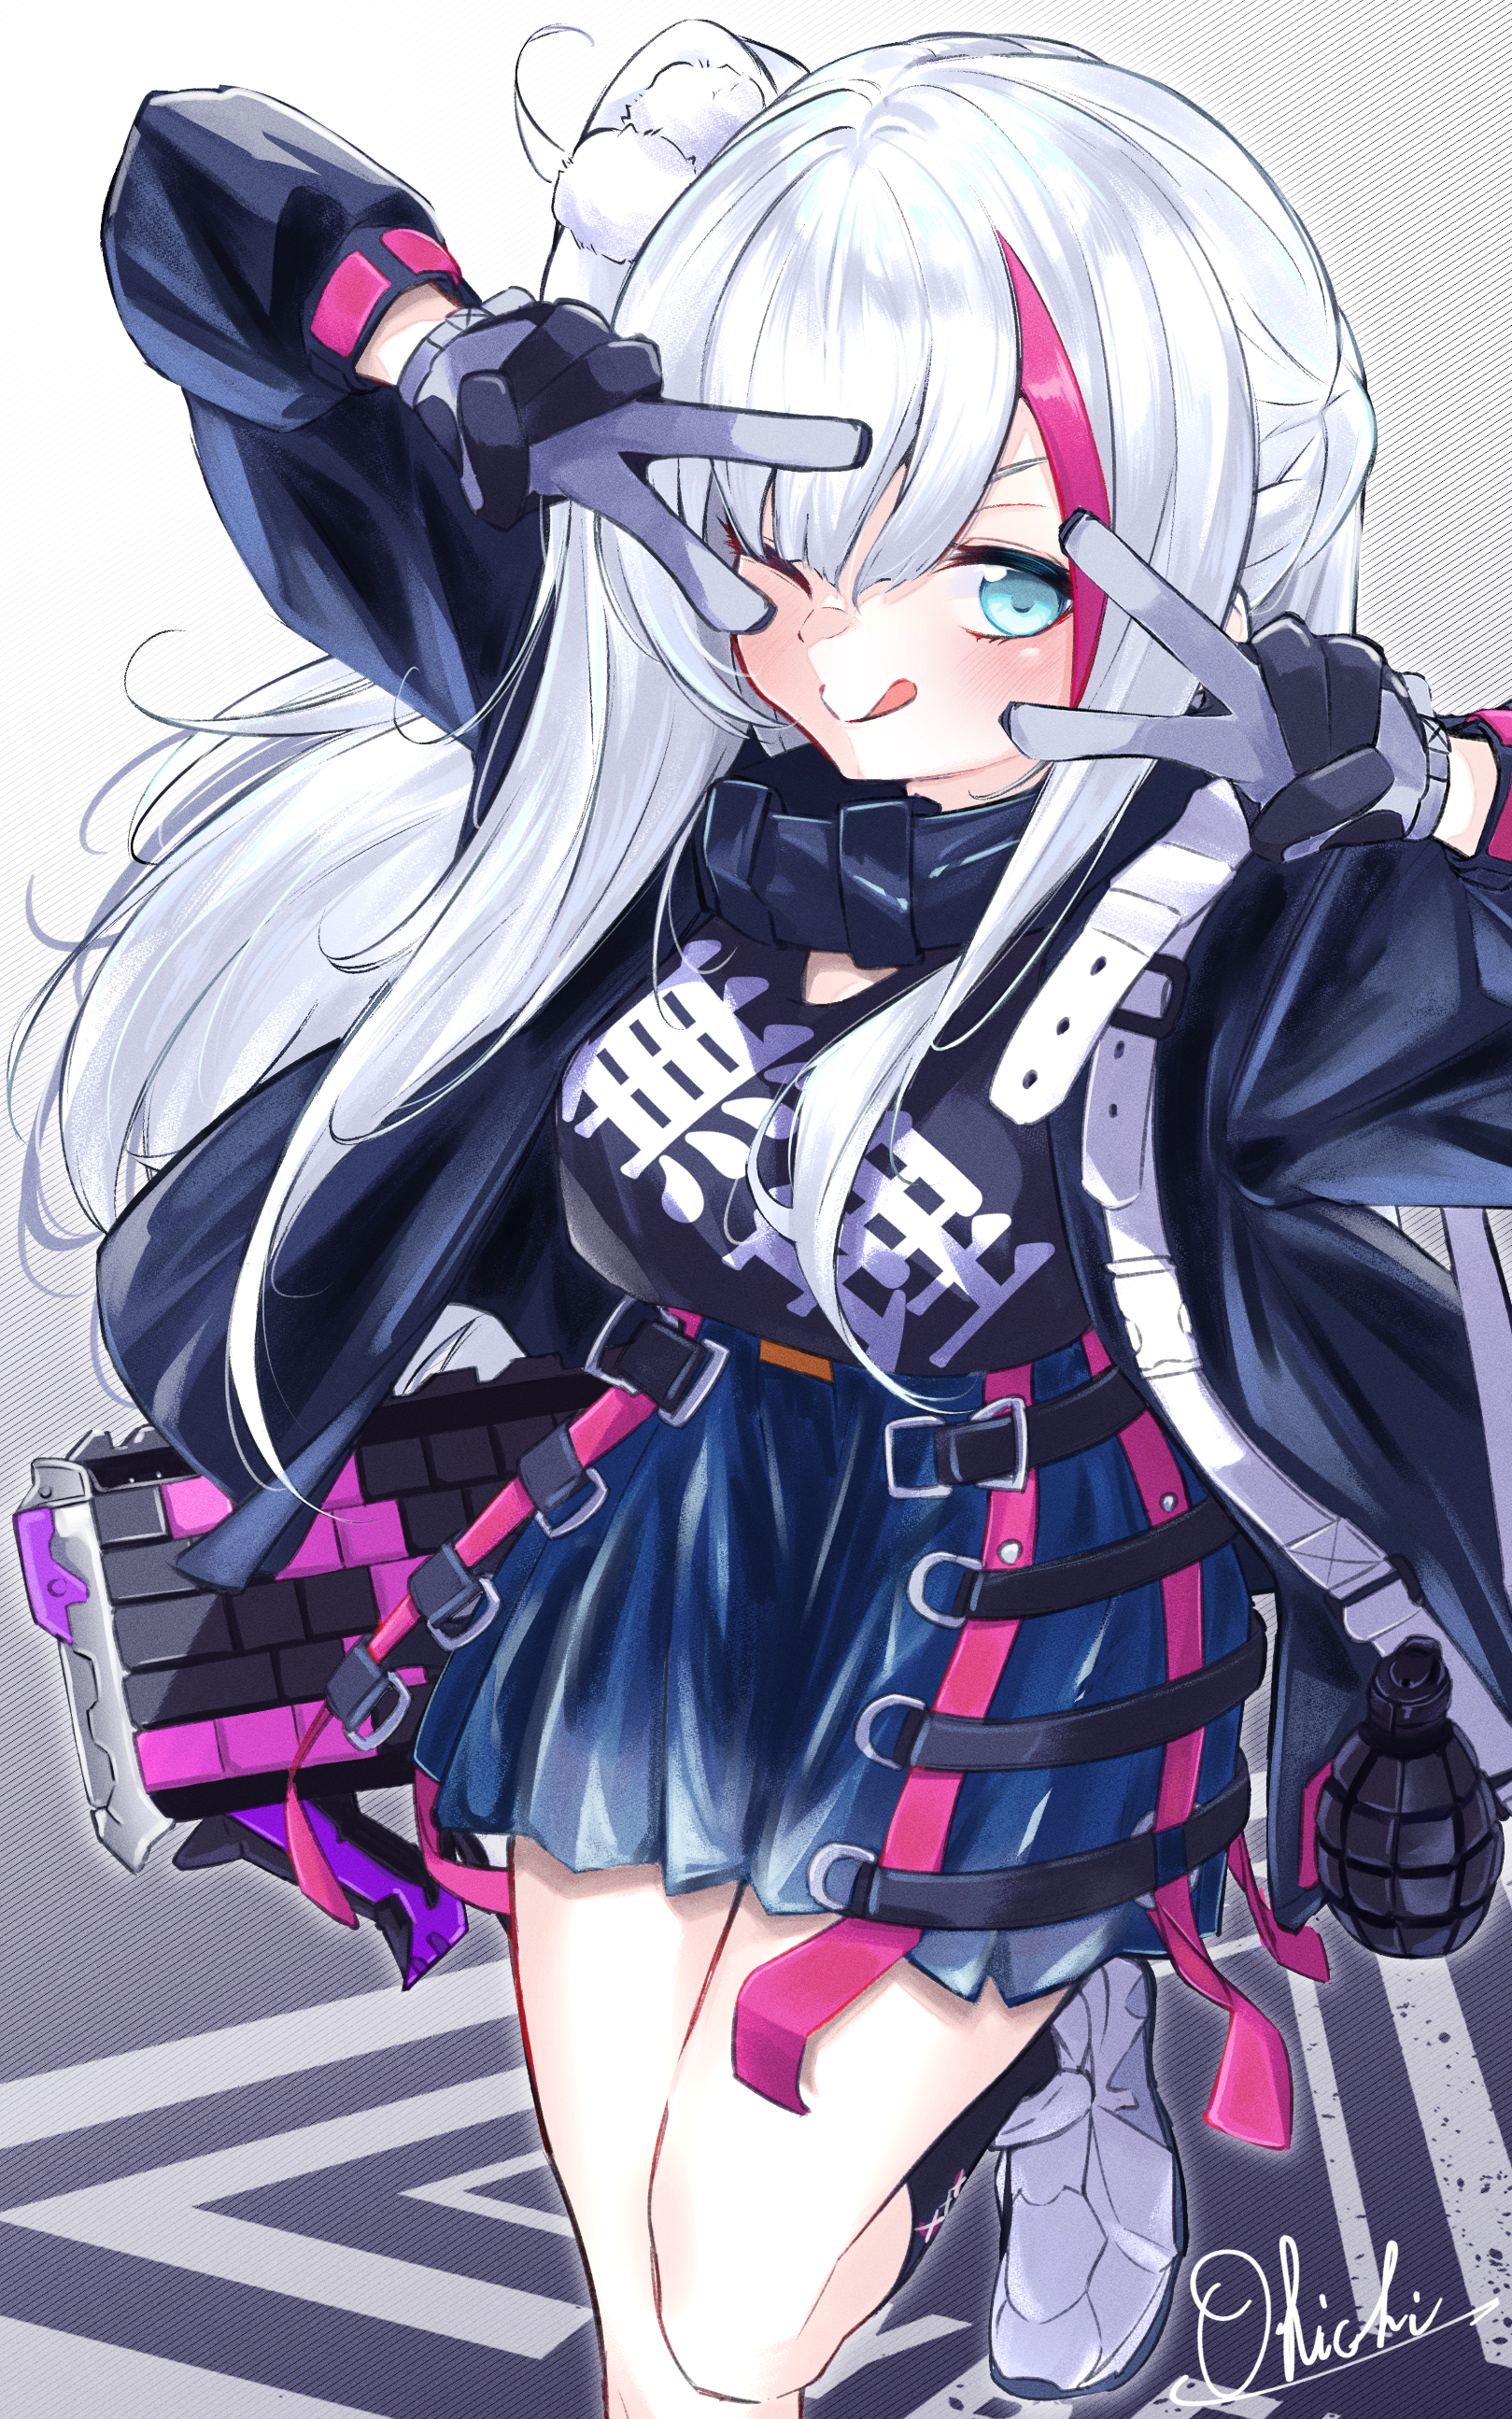 __mdr_and_kuro_girls_frontline_and_1_more_drawn_by_ohichi16__6c0880fb3225b7040af2a96c06b87e15.png